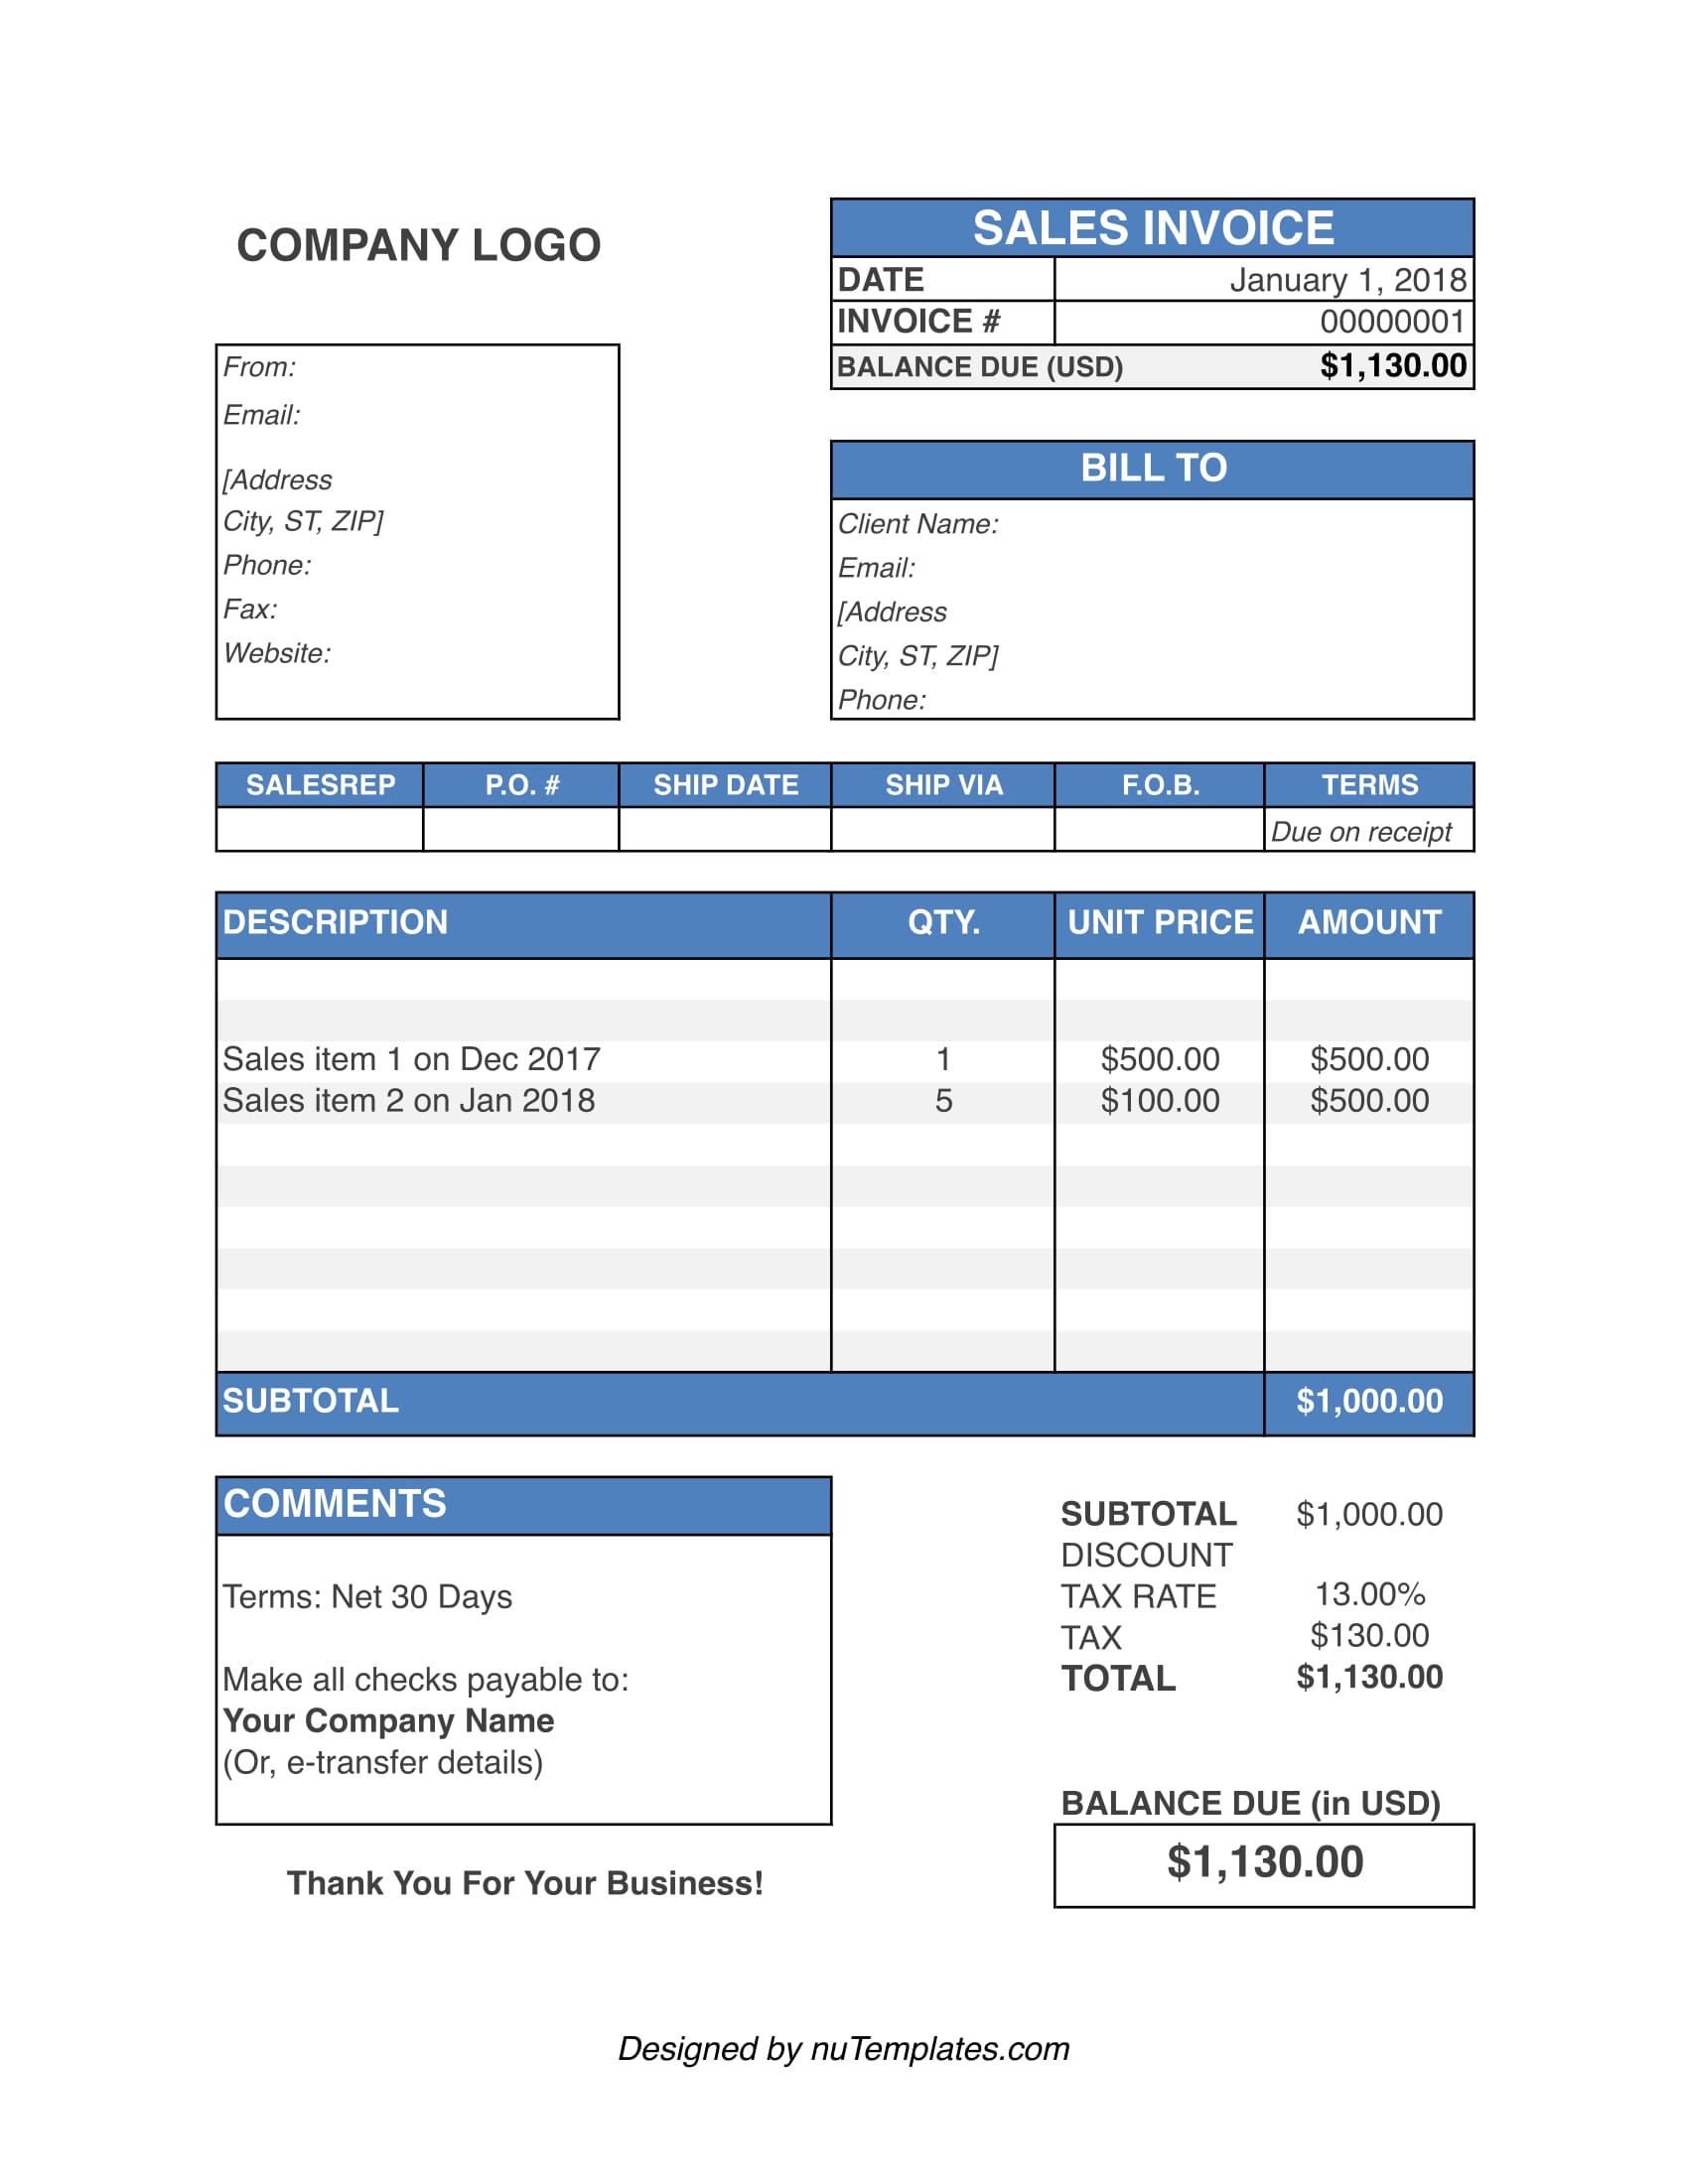 sales invoice template sales invoices nutemplates